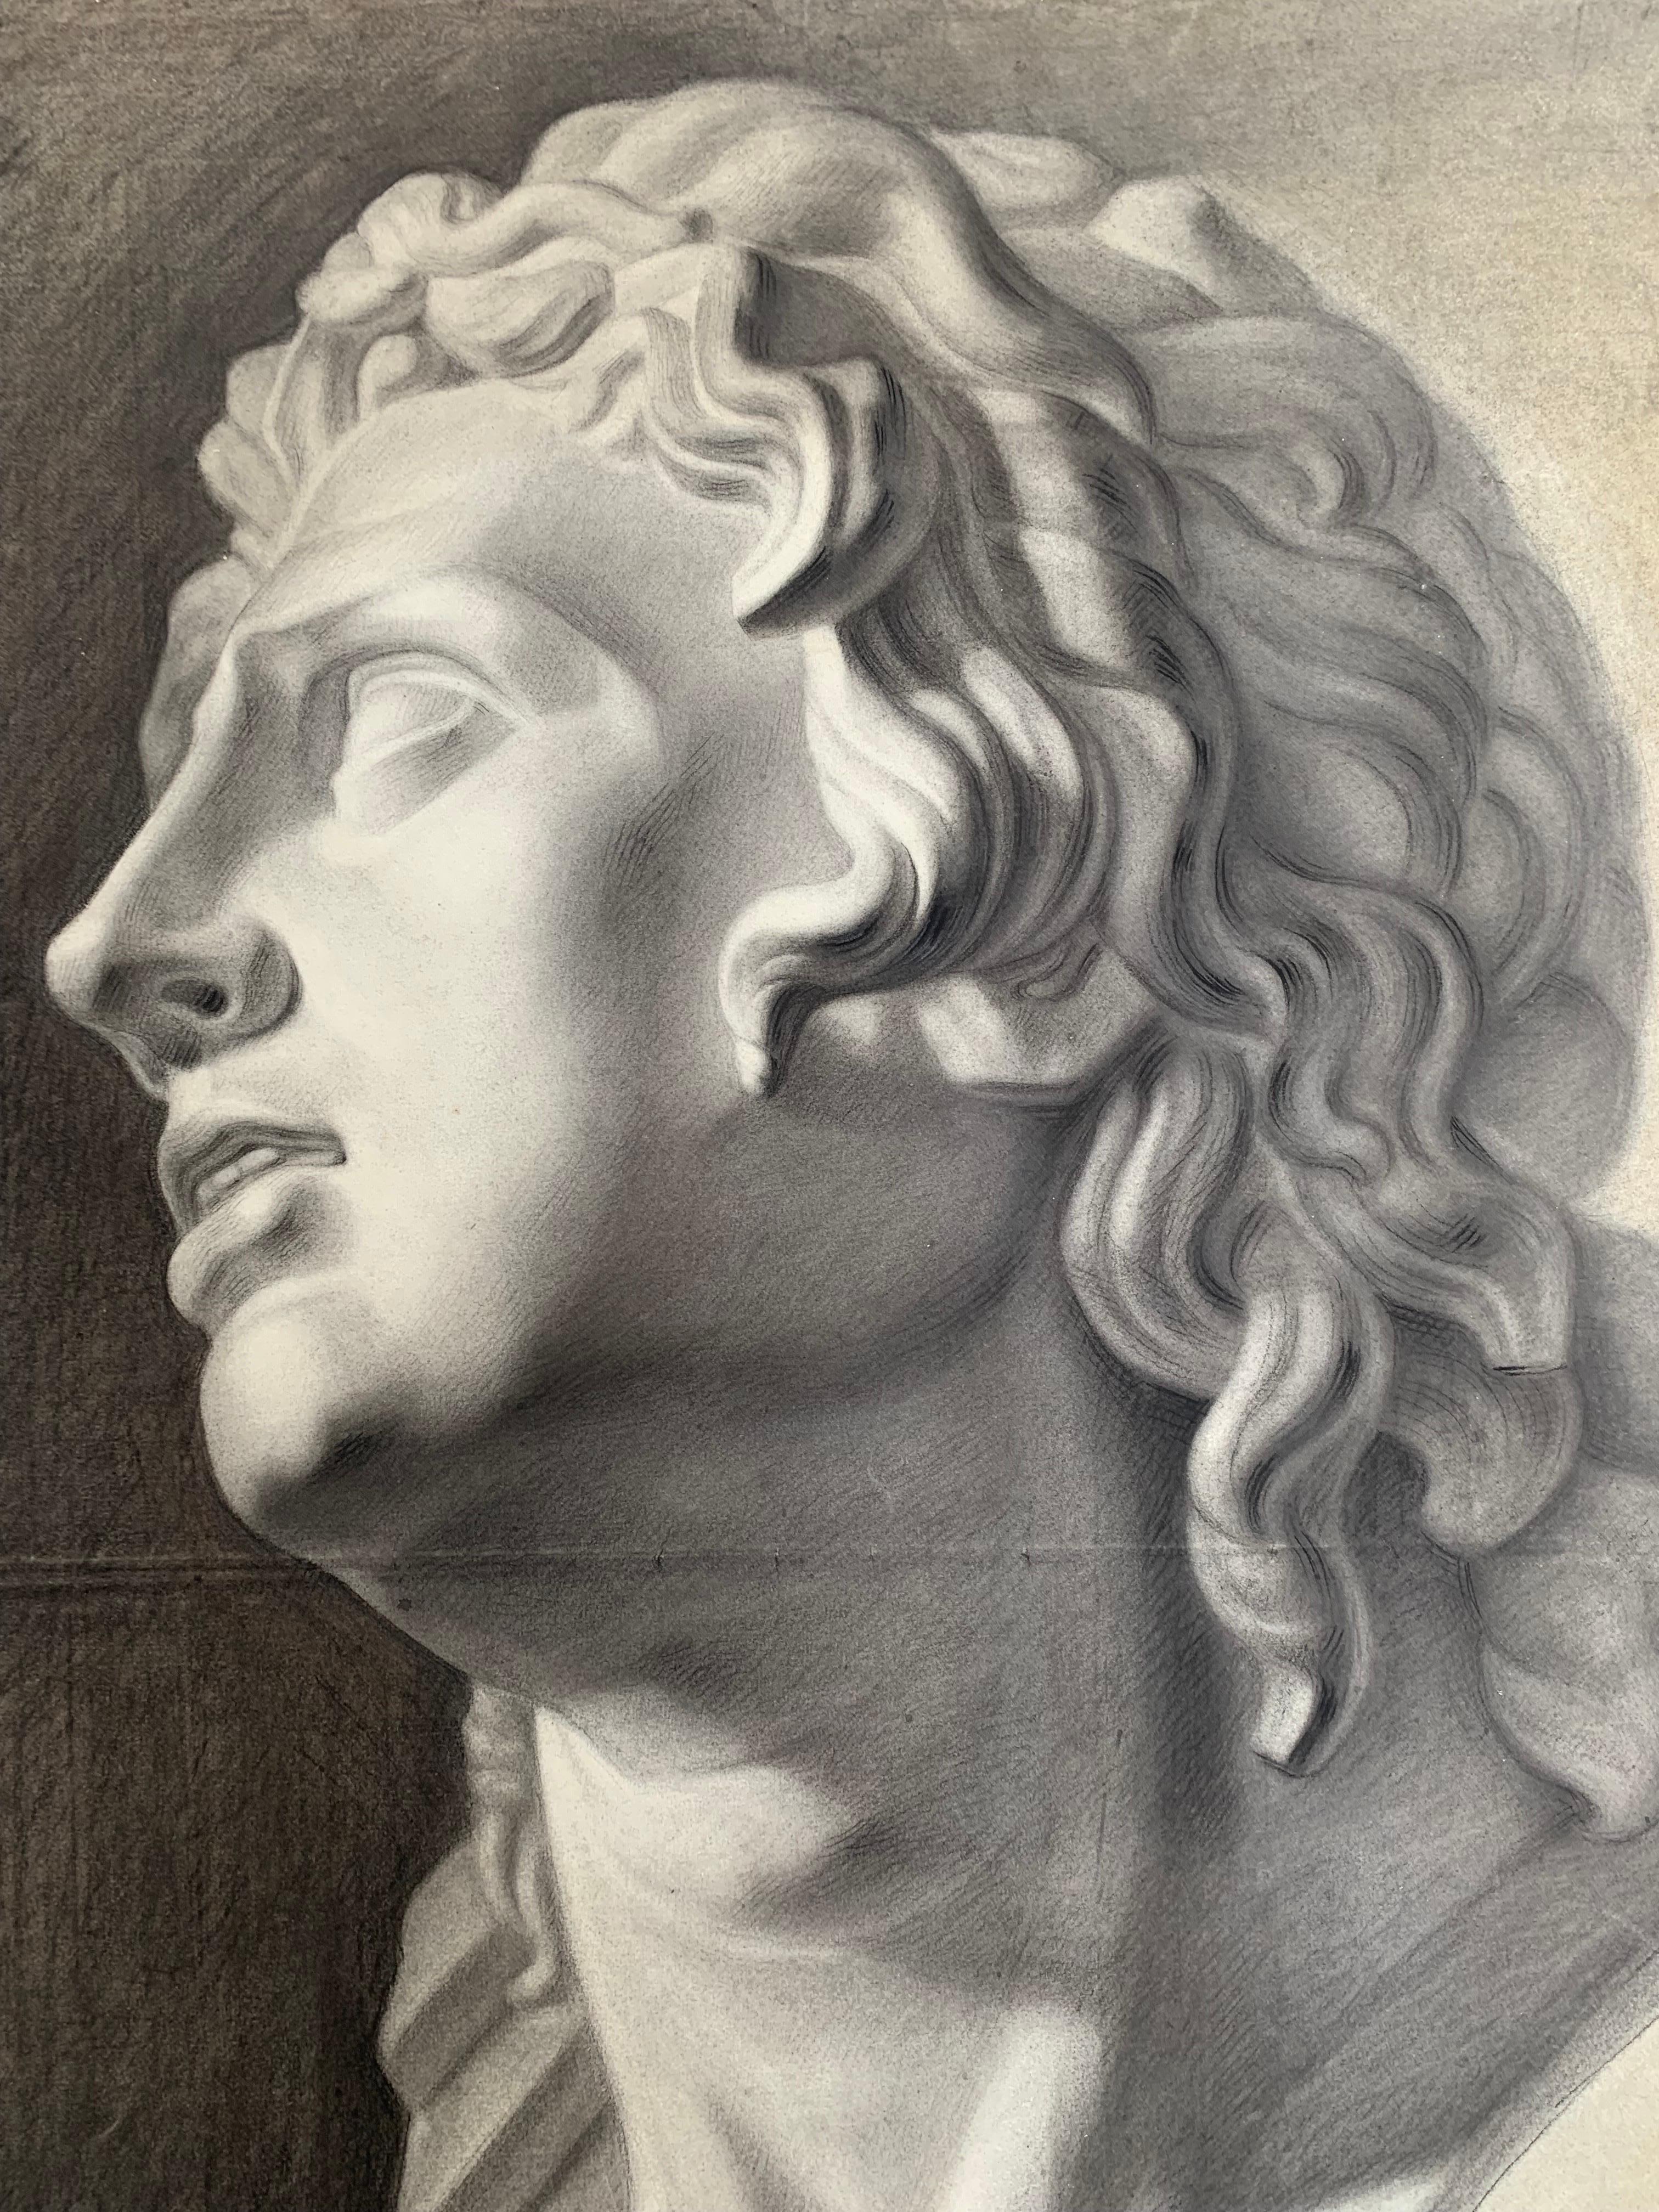 Large XIXth cent. Academic drawing of Alexander The Great’s bust from Uffizi.  6